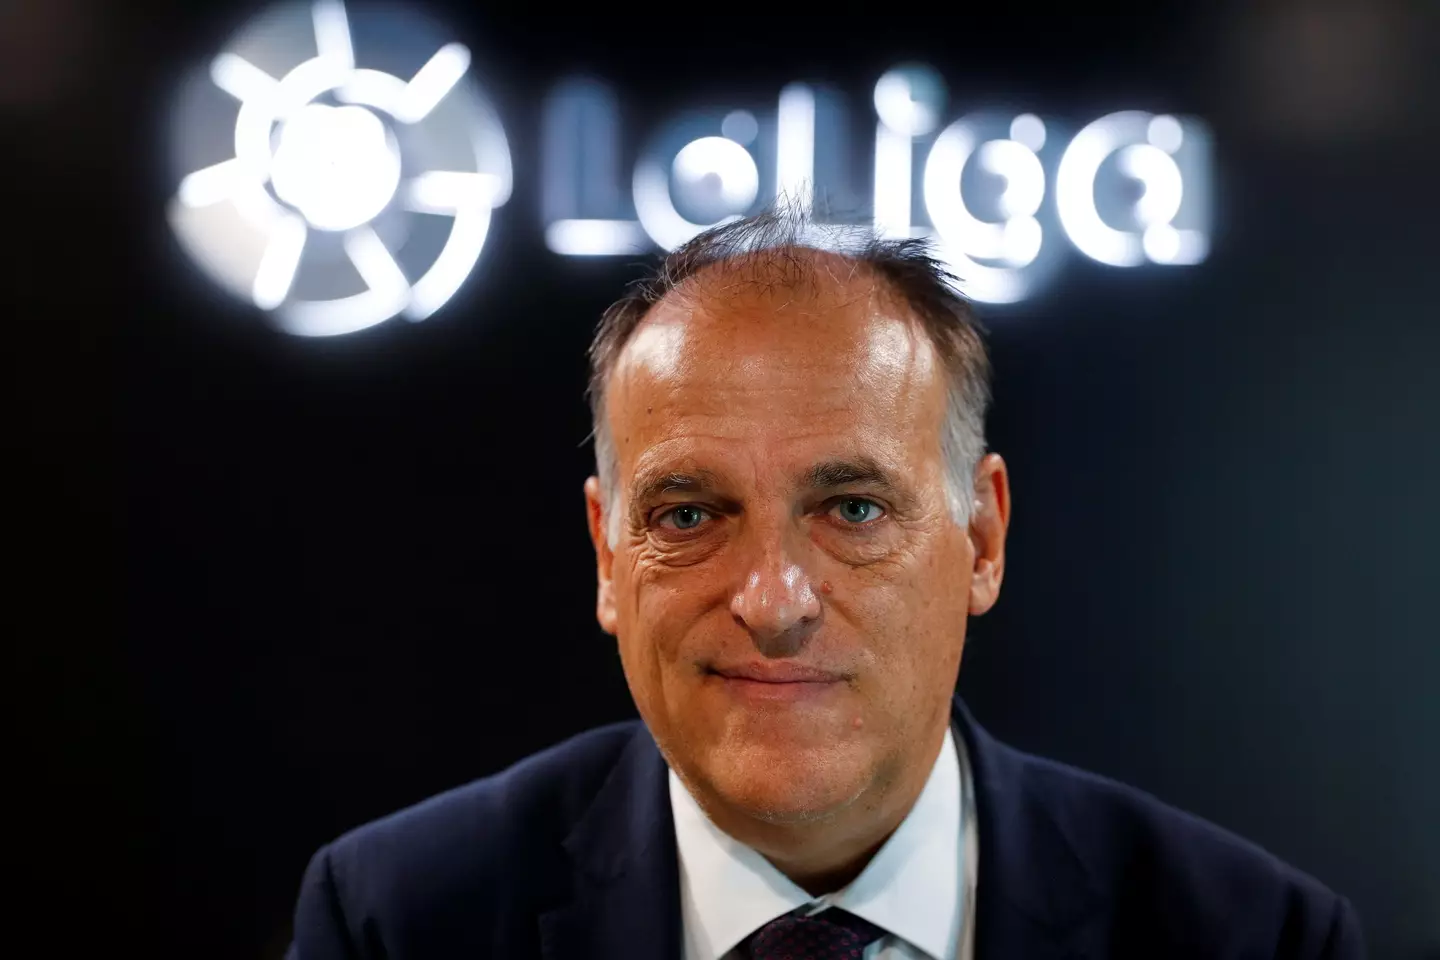 La Liga president Javier Tebas has questioned how PSG can afford to offer Mbappe such a lucrative contract (Image: PA)